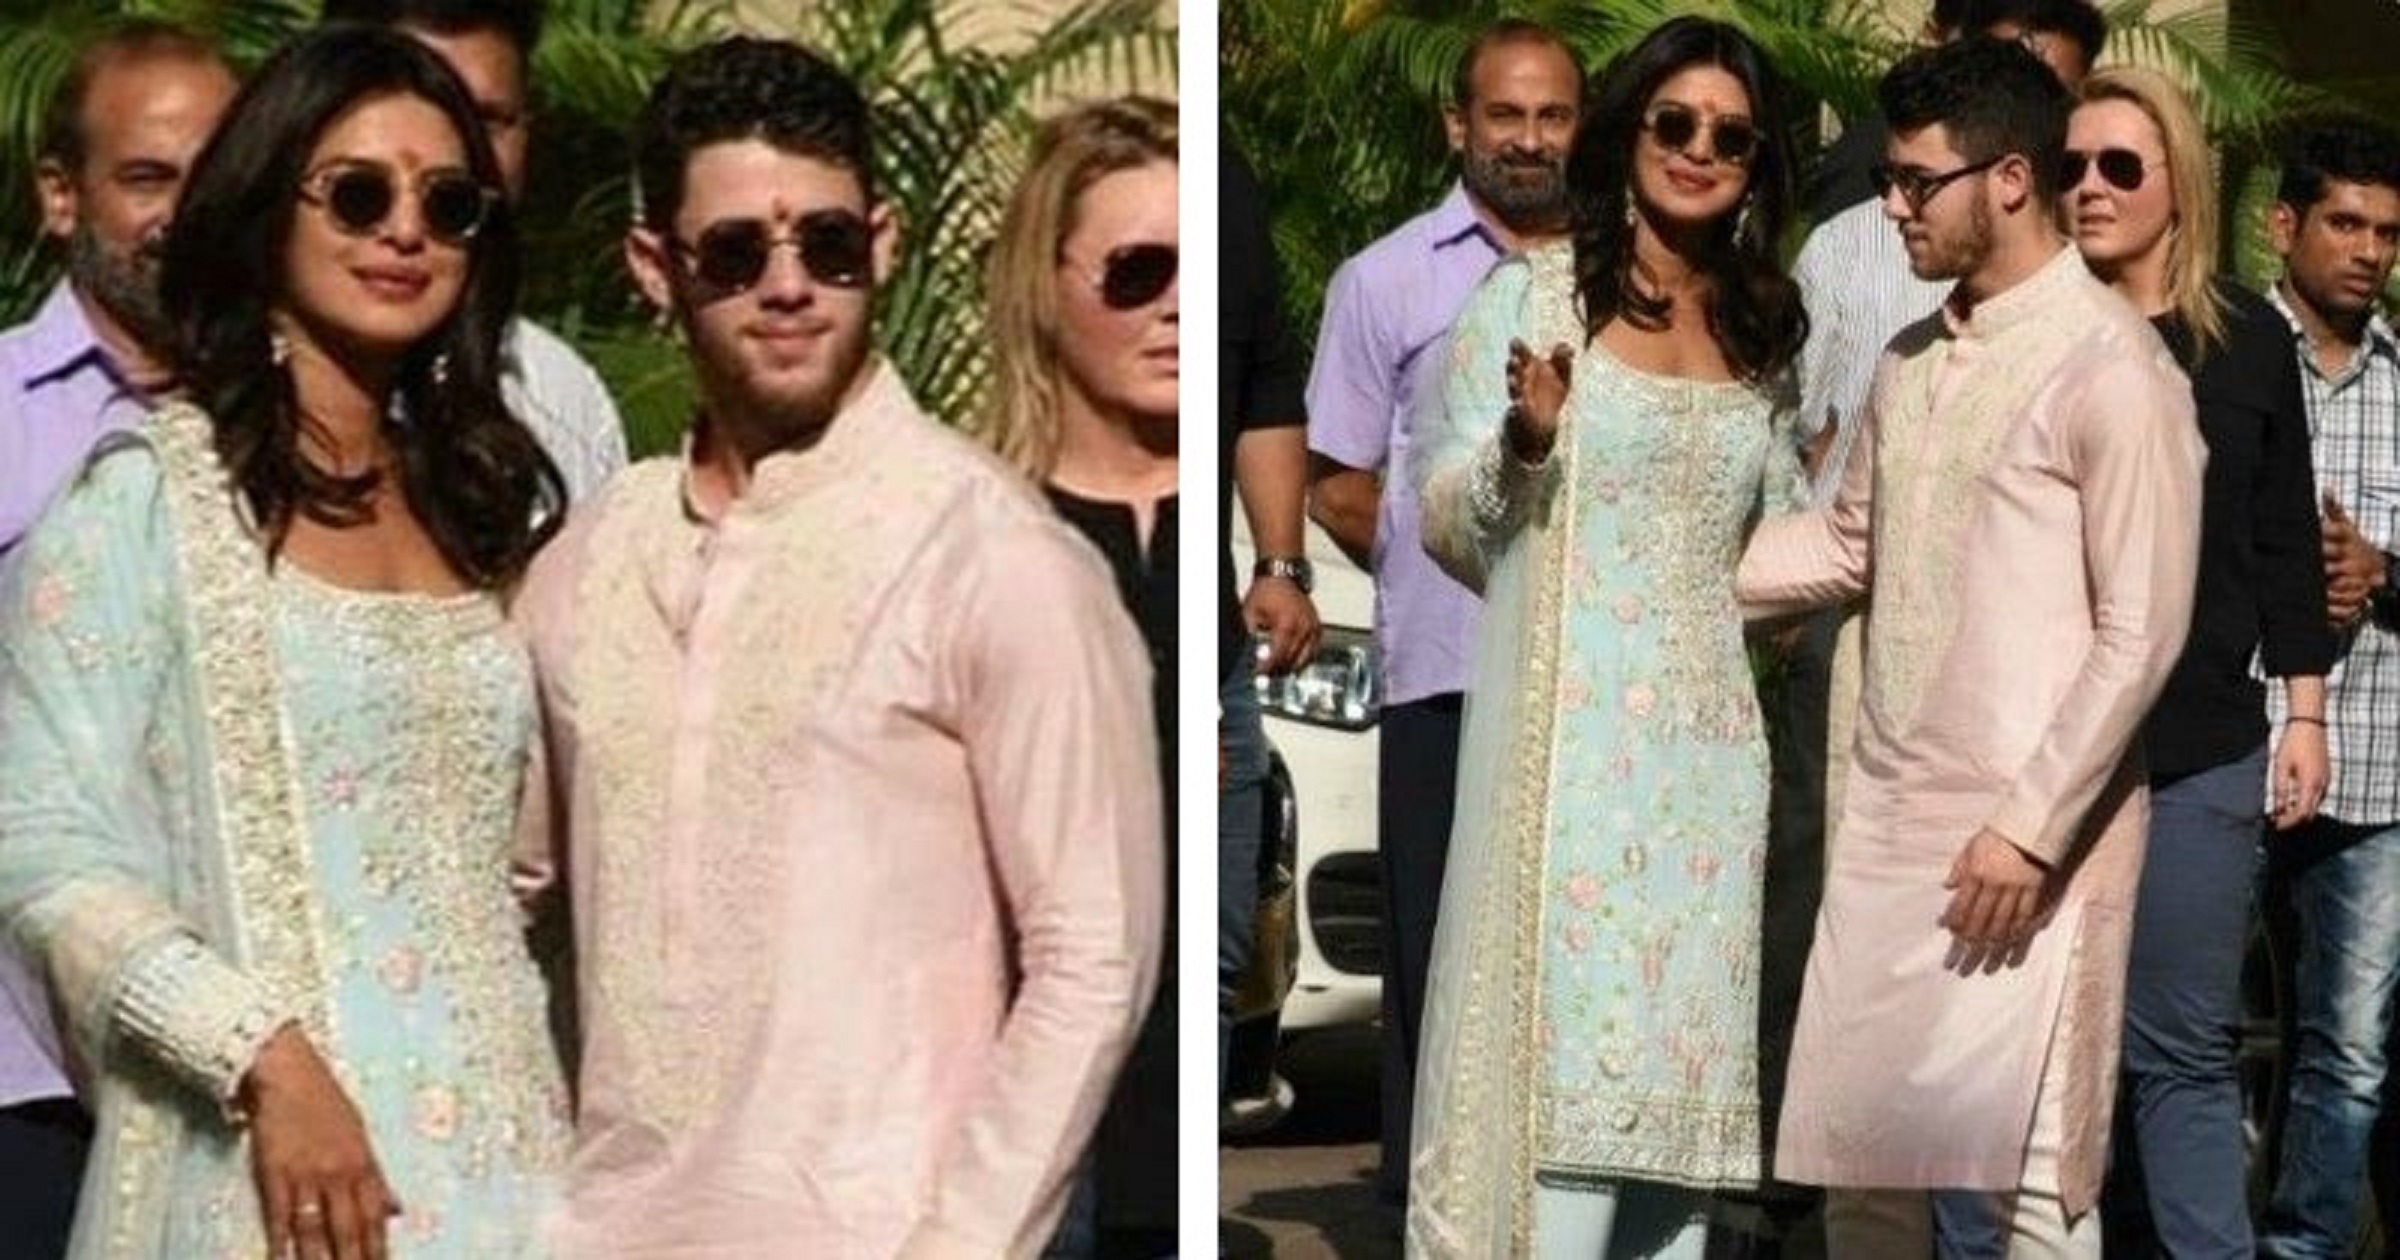 Pre-Wedding Celebrations For Priyanka and Nick: The Lovebirds Spotted In Traditional Indian Attires!